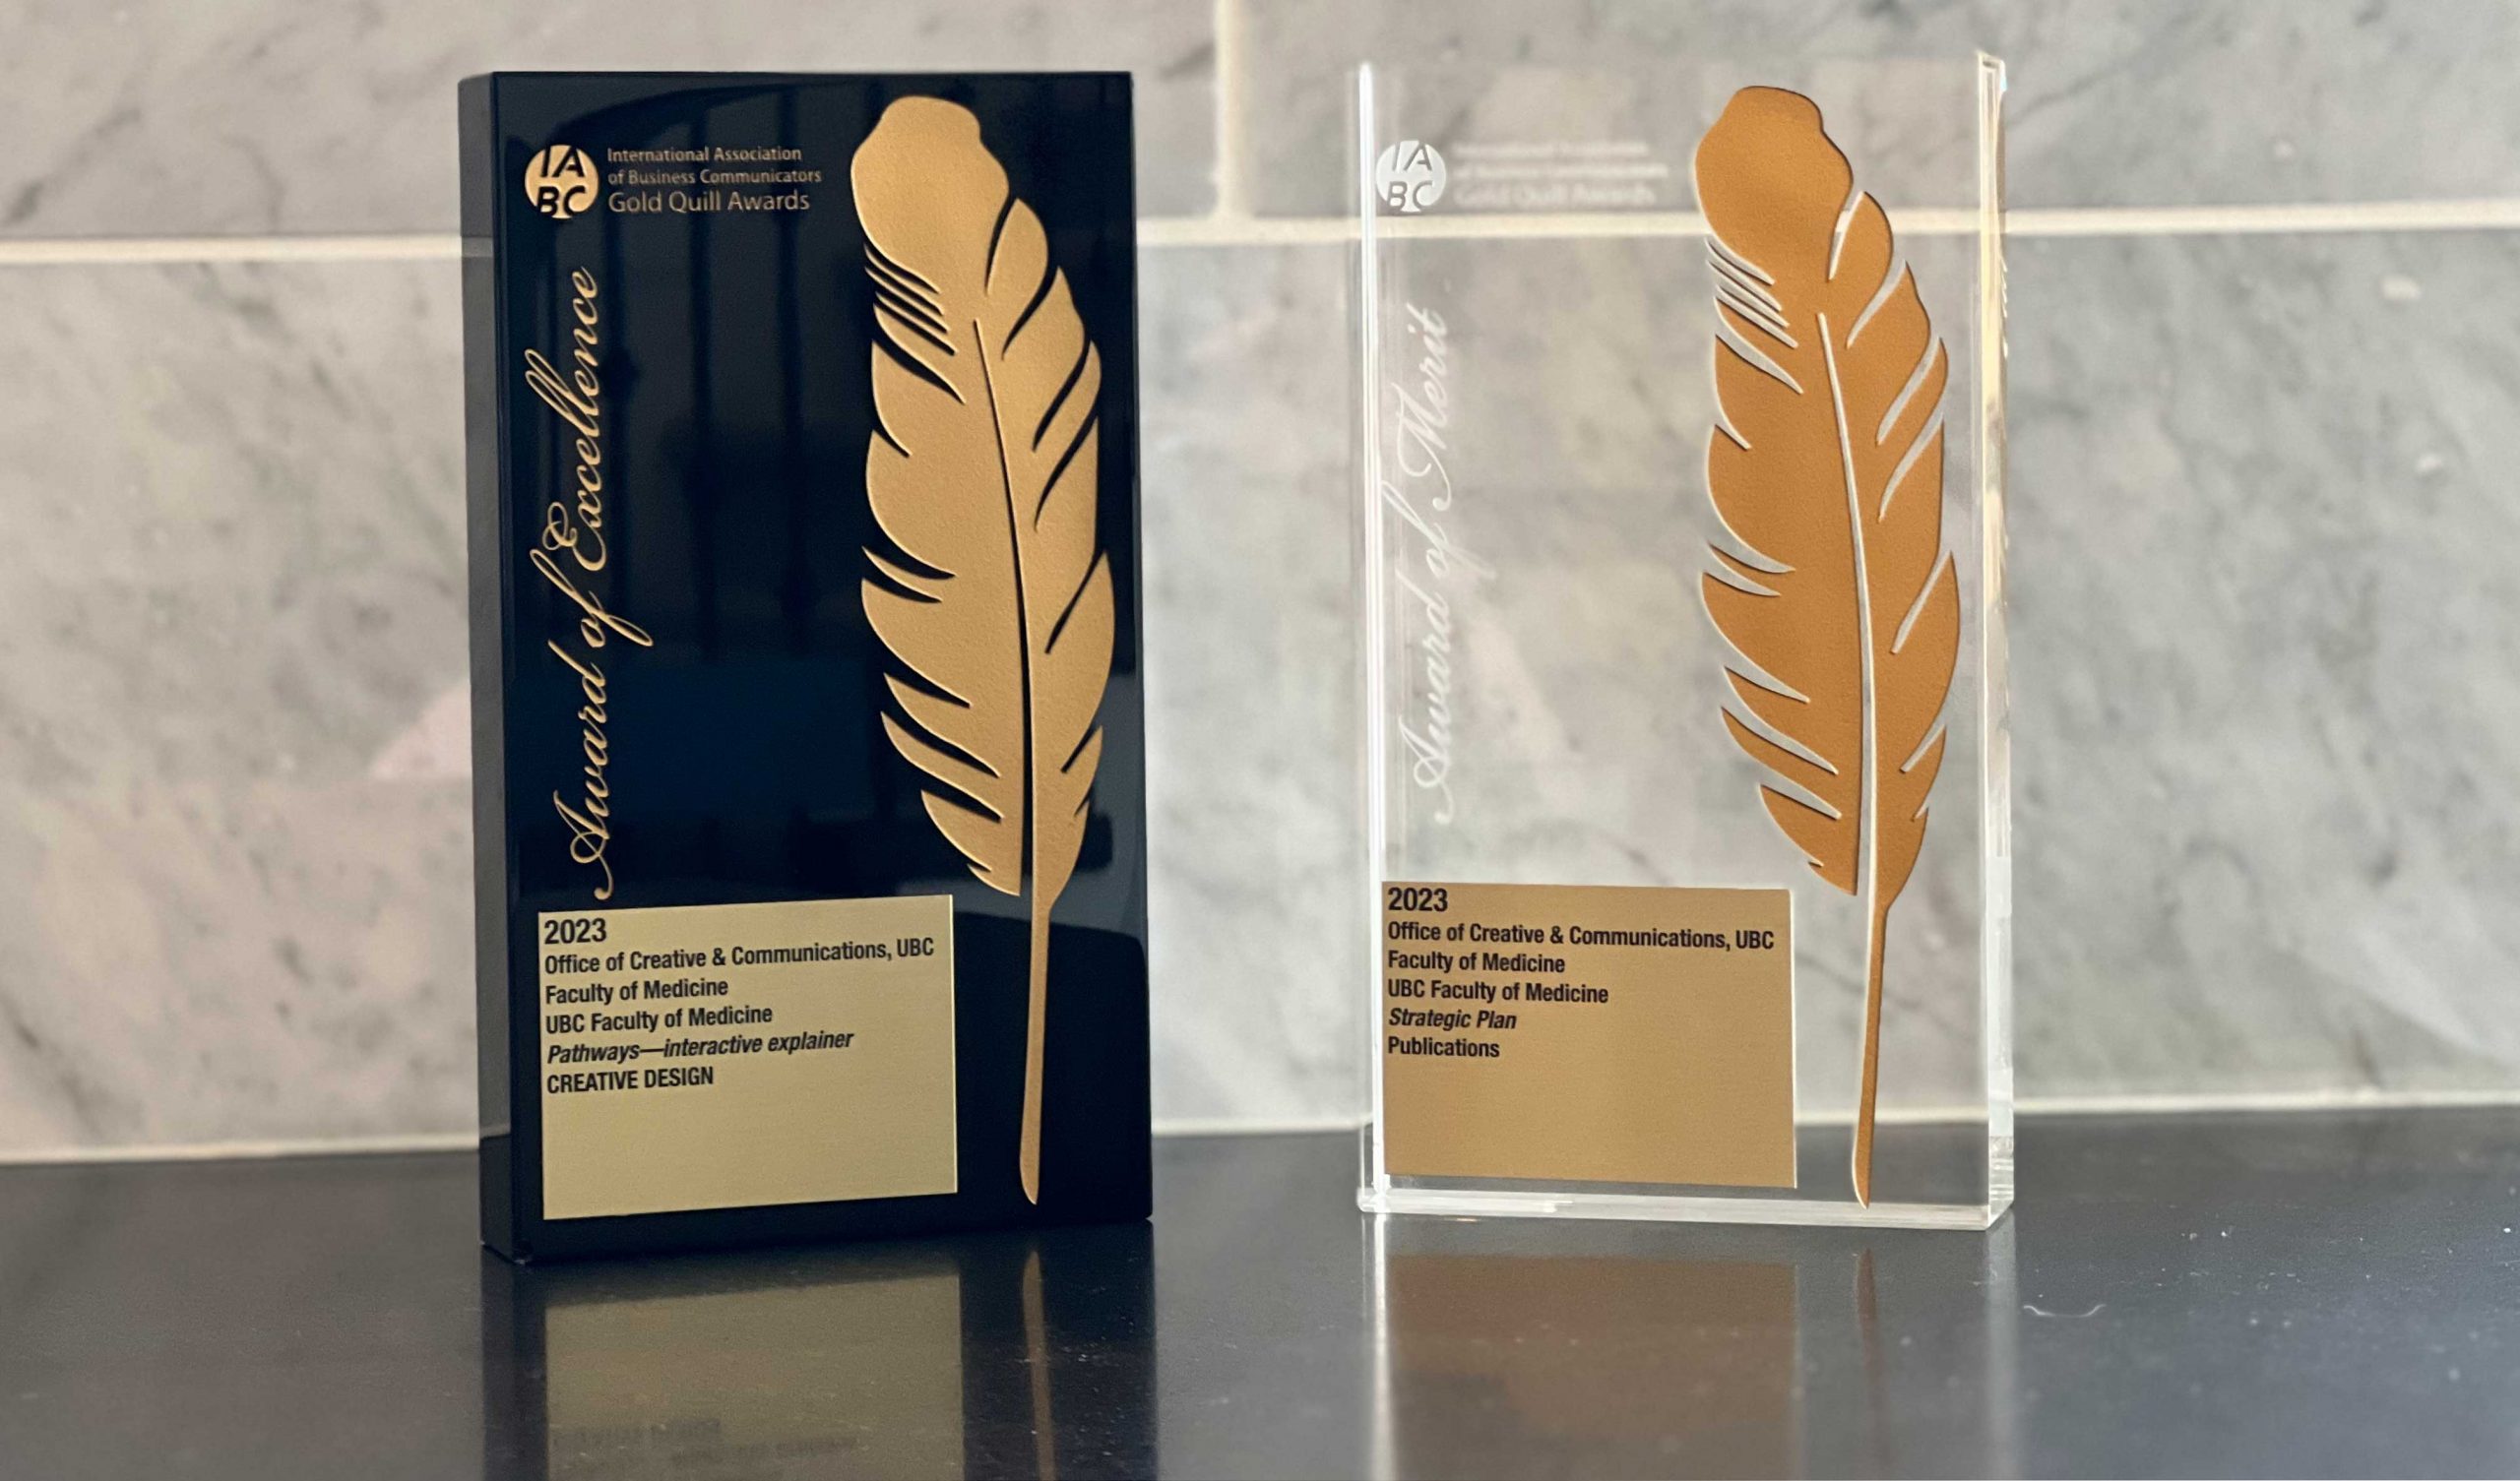 A Gold Quill Award of Excellence in the Creative Design category for Pathways—interactive explainer on the left and a Gold Quill Award of Merit in the Publications category for Strategic Plan on the right.